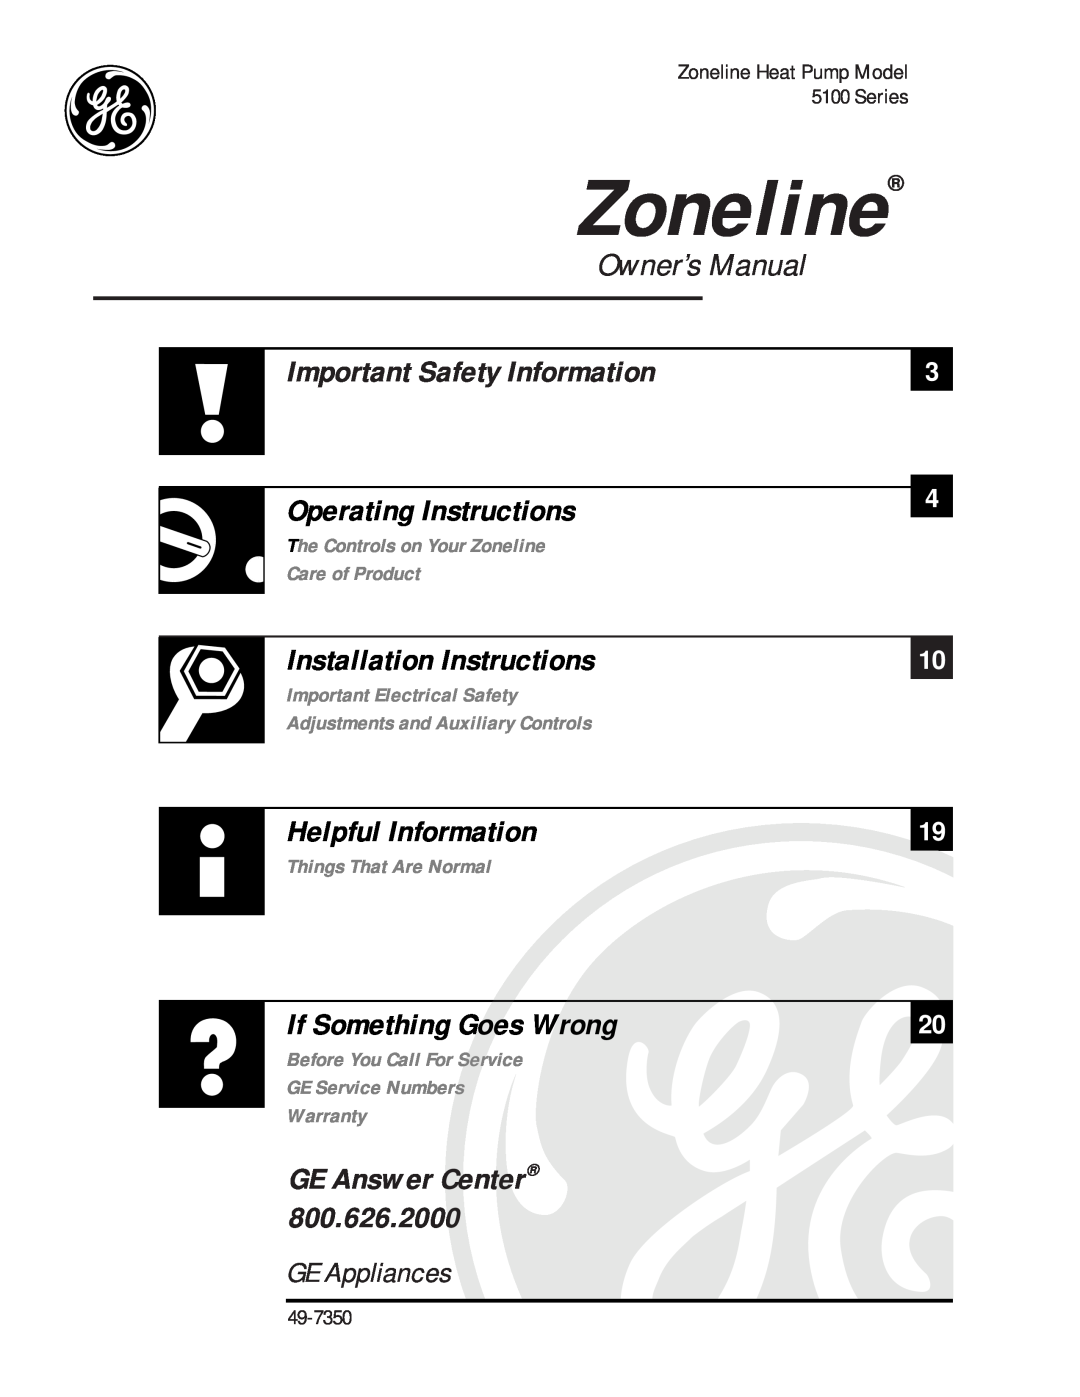 GE installation instructions GE Answer Center, Zoneline Heat Pump Model 5100 Series, 49-7350, Operating Instructions 